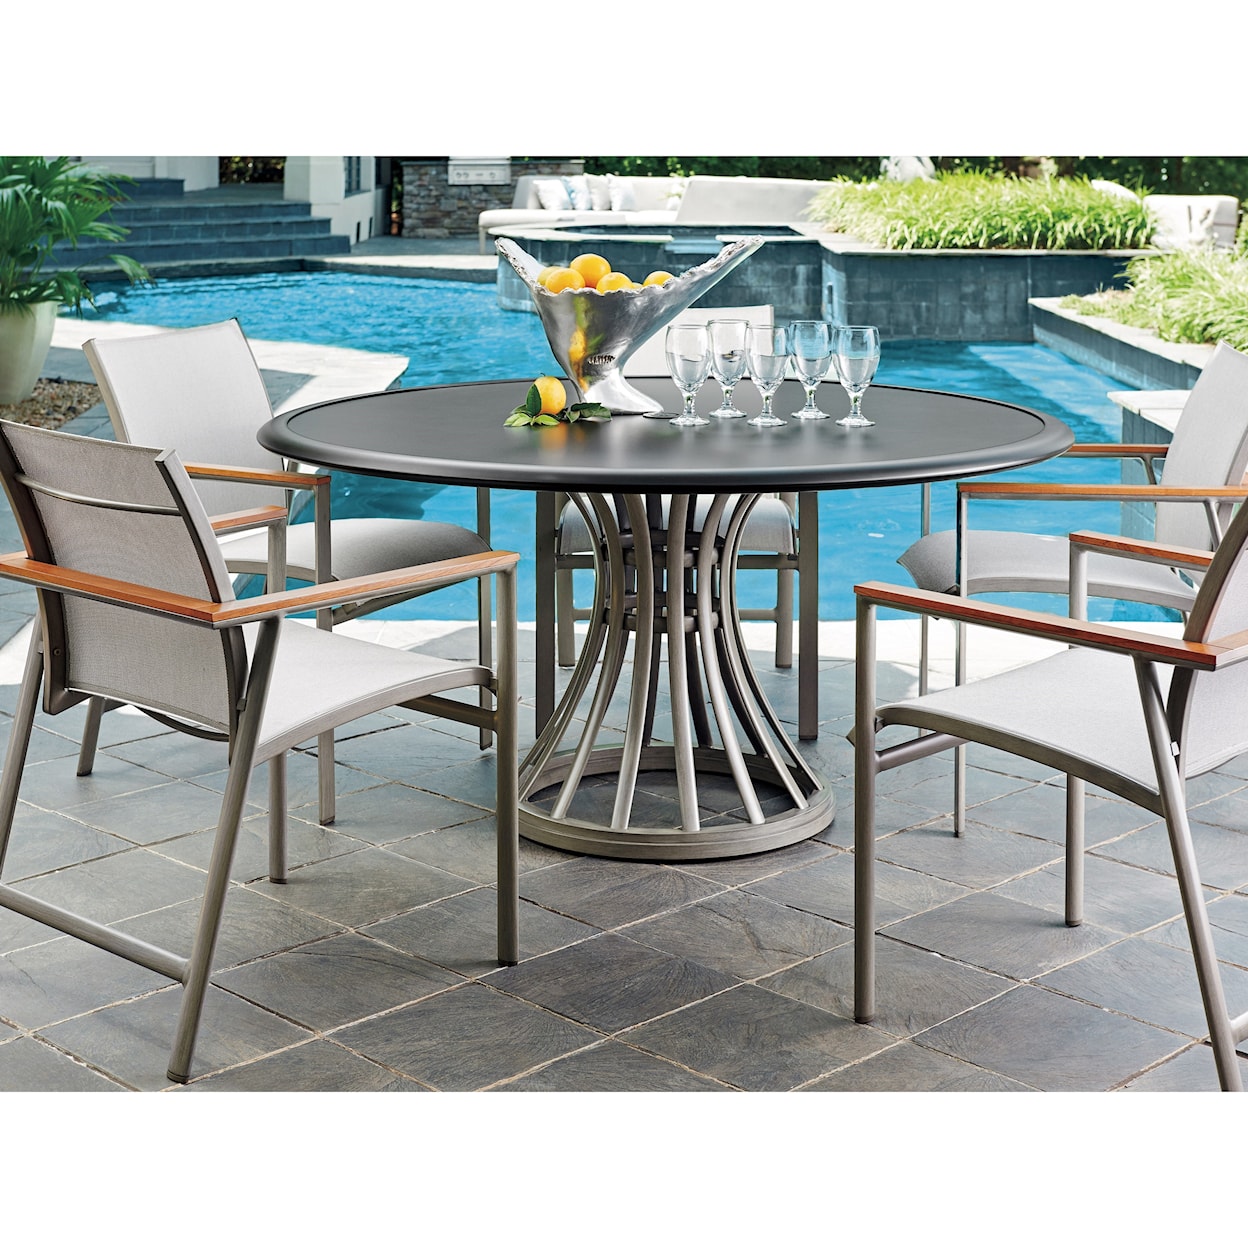 Tommy Bahama Outdoor Living Del Mar Round Outdoor Dining Table